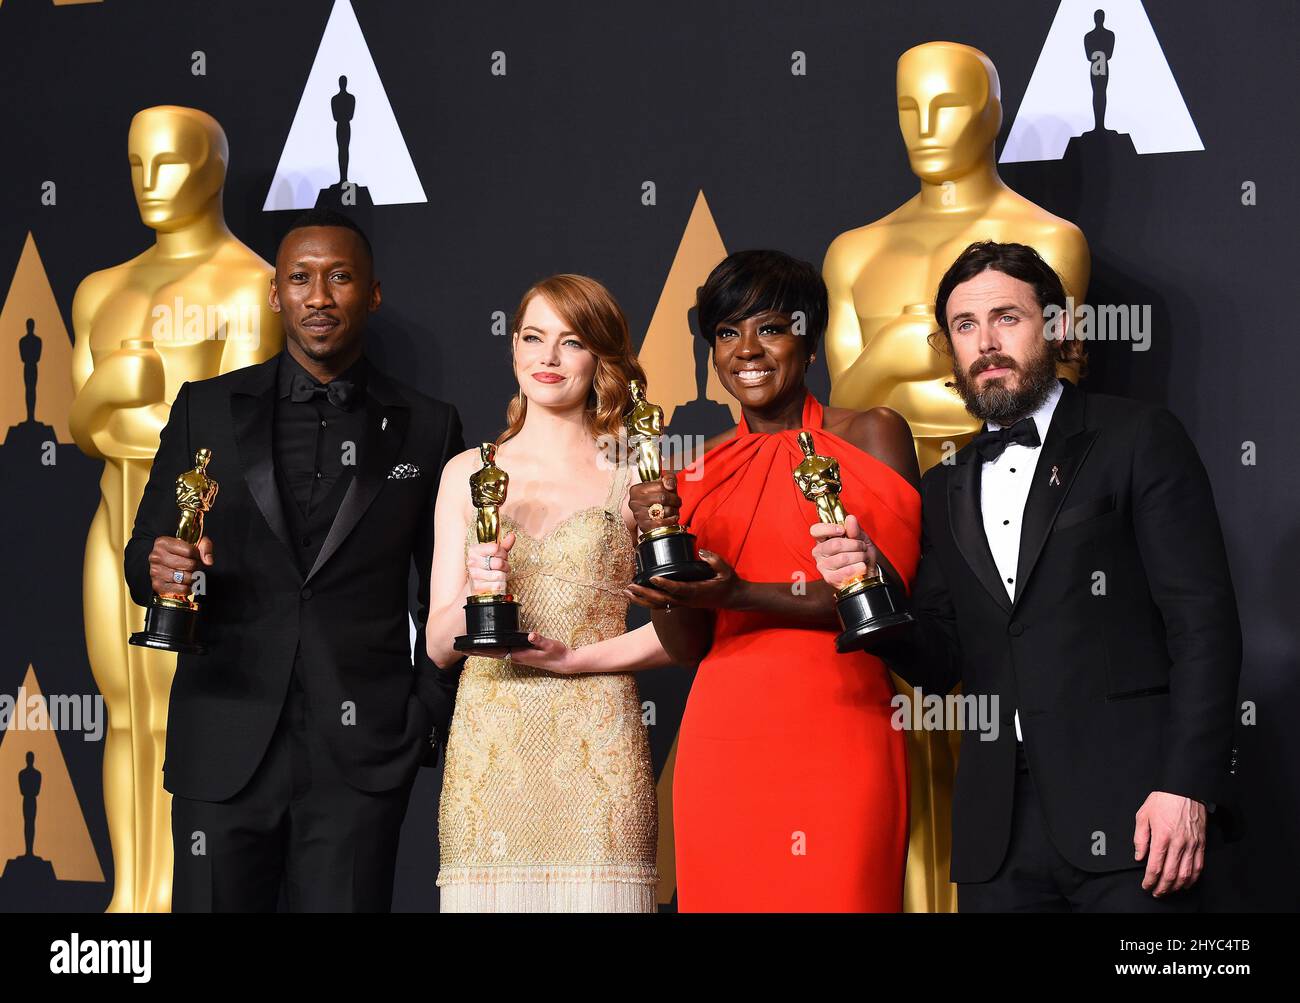 Mahershala Ali, Emma Stone, Viola Davis and Casey Affleck in the press room at the 89th Academy Awards held at the Dolby Theatre in Hollywood, Los Angeles, USA. Stock Photo